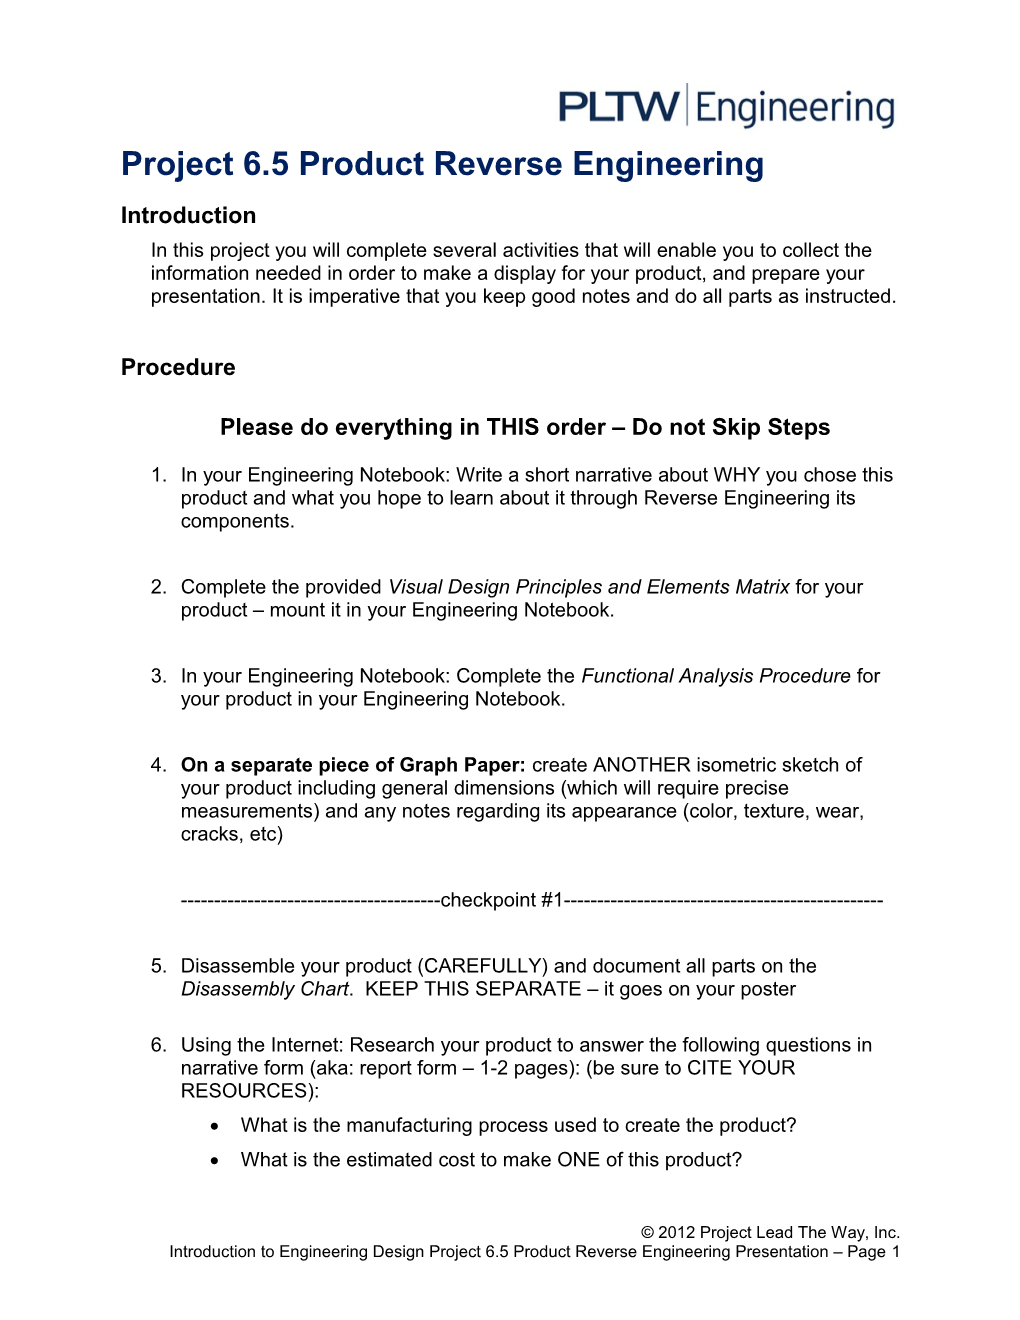 Project 6.5 Product Reverse Engineering Presentation